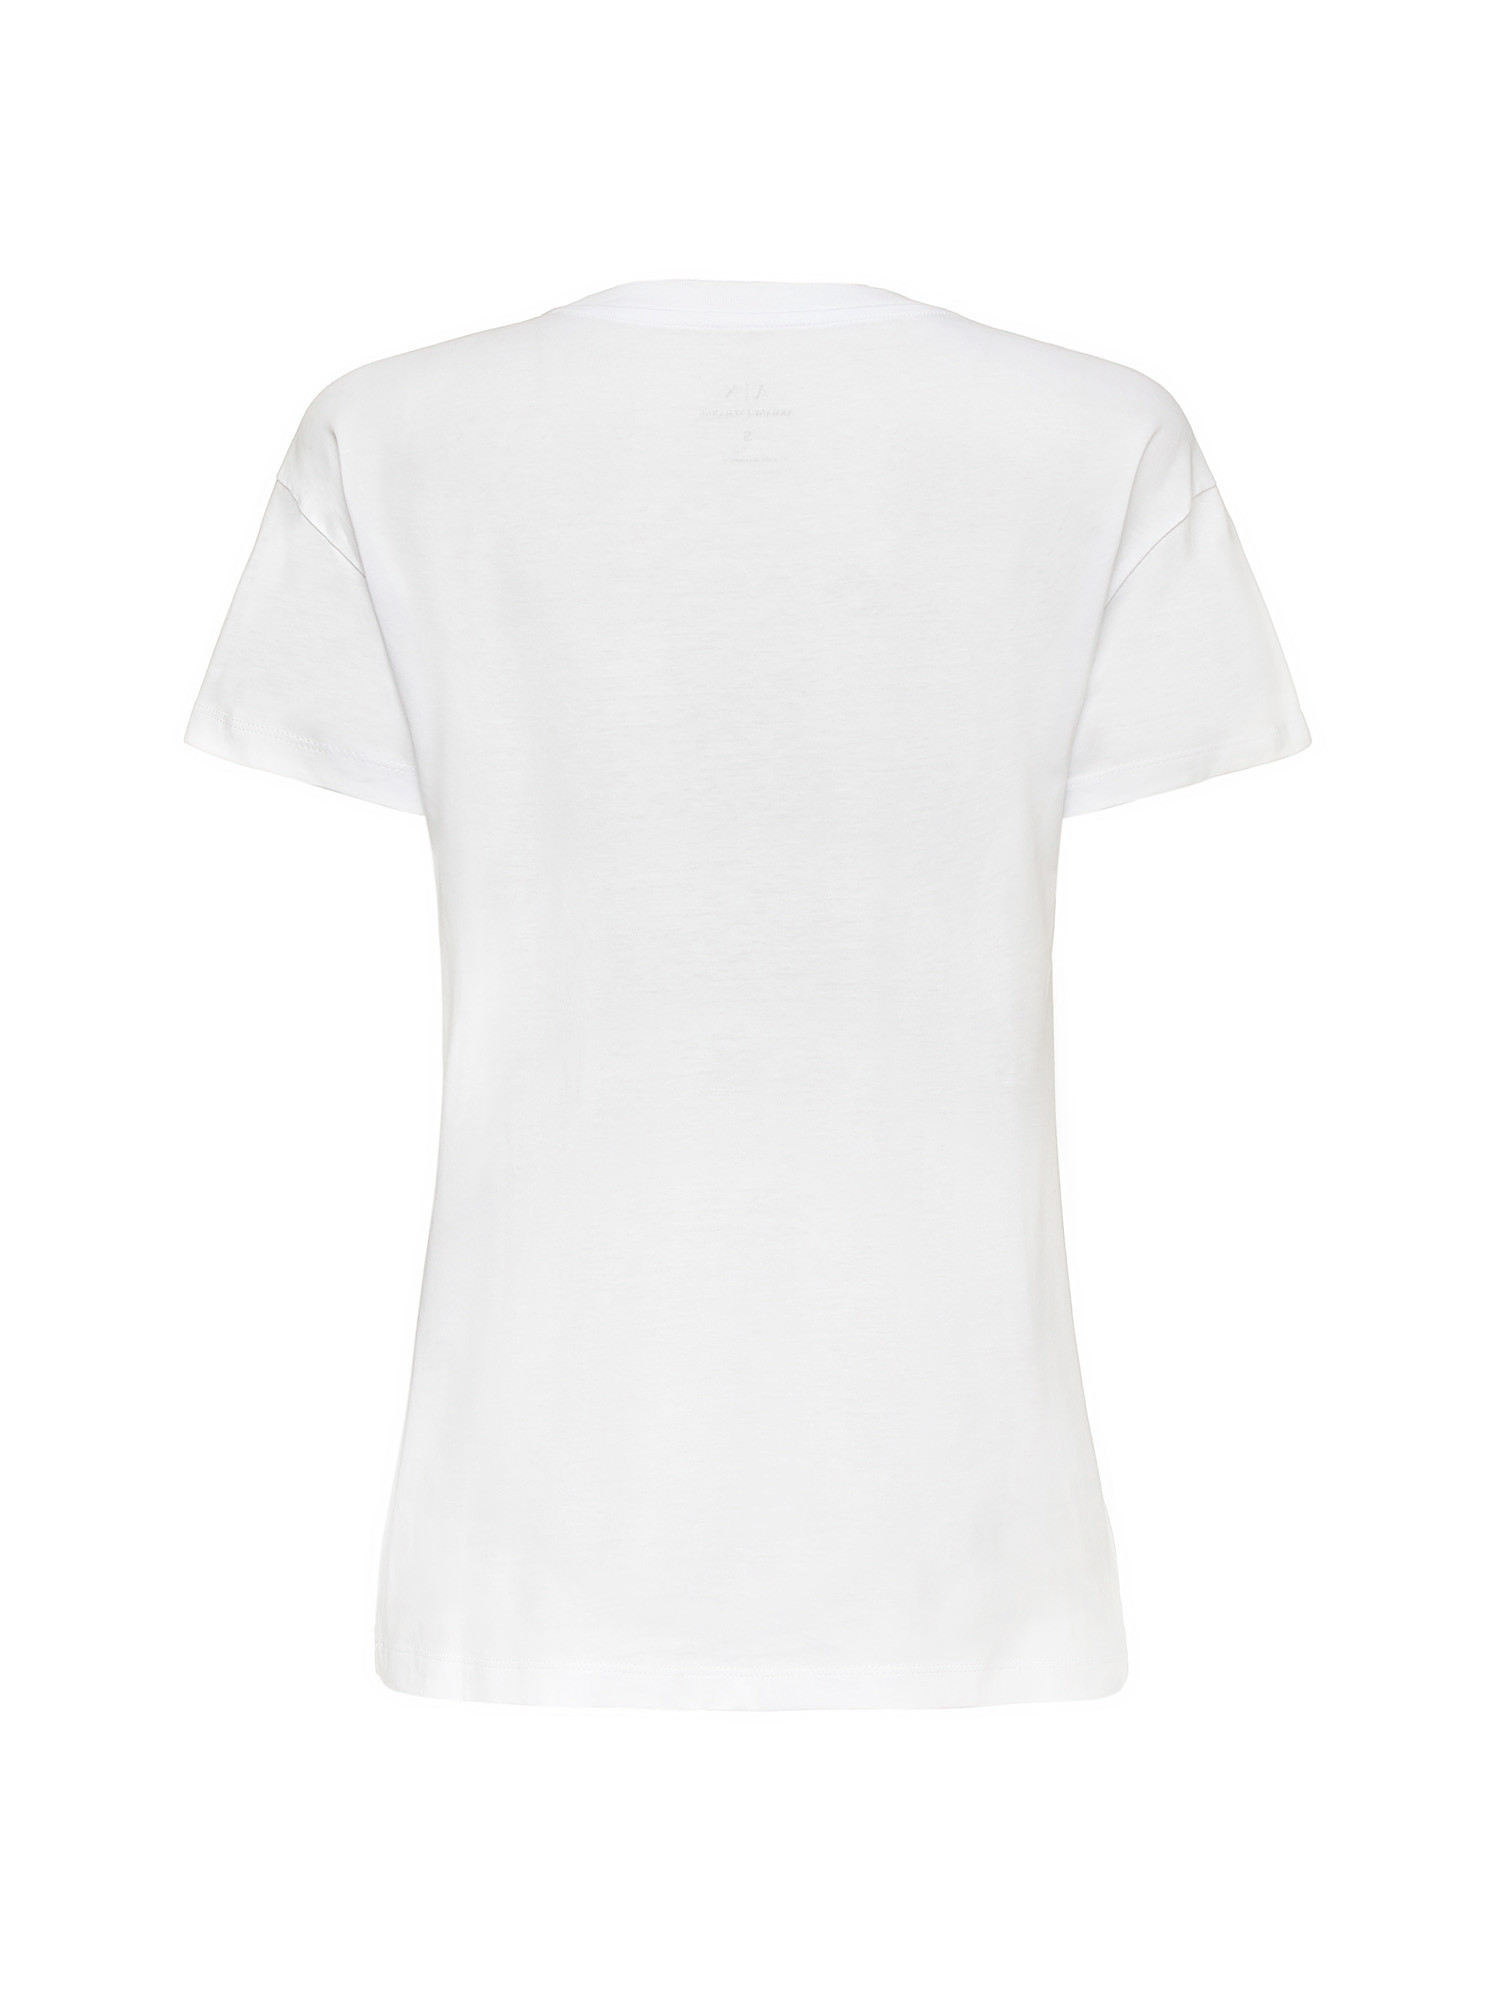 Armani Exchange - Boyfriend fit cotton T-shirt with logo, White, large image number 1